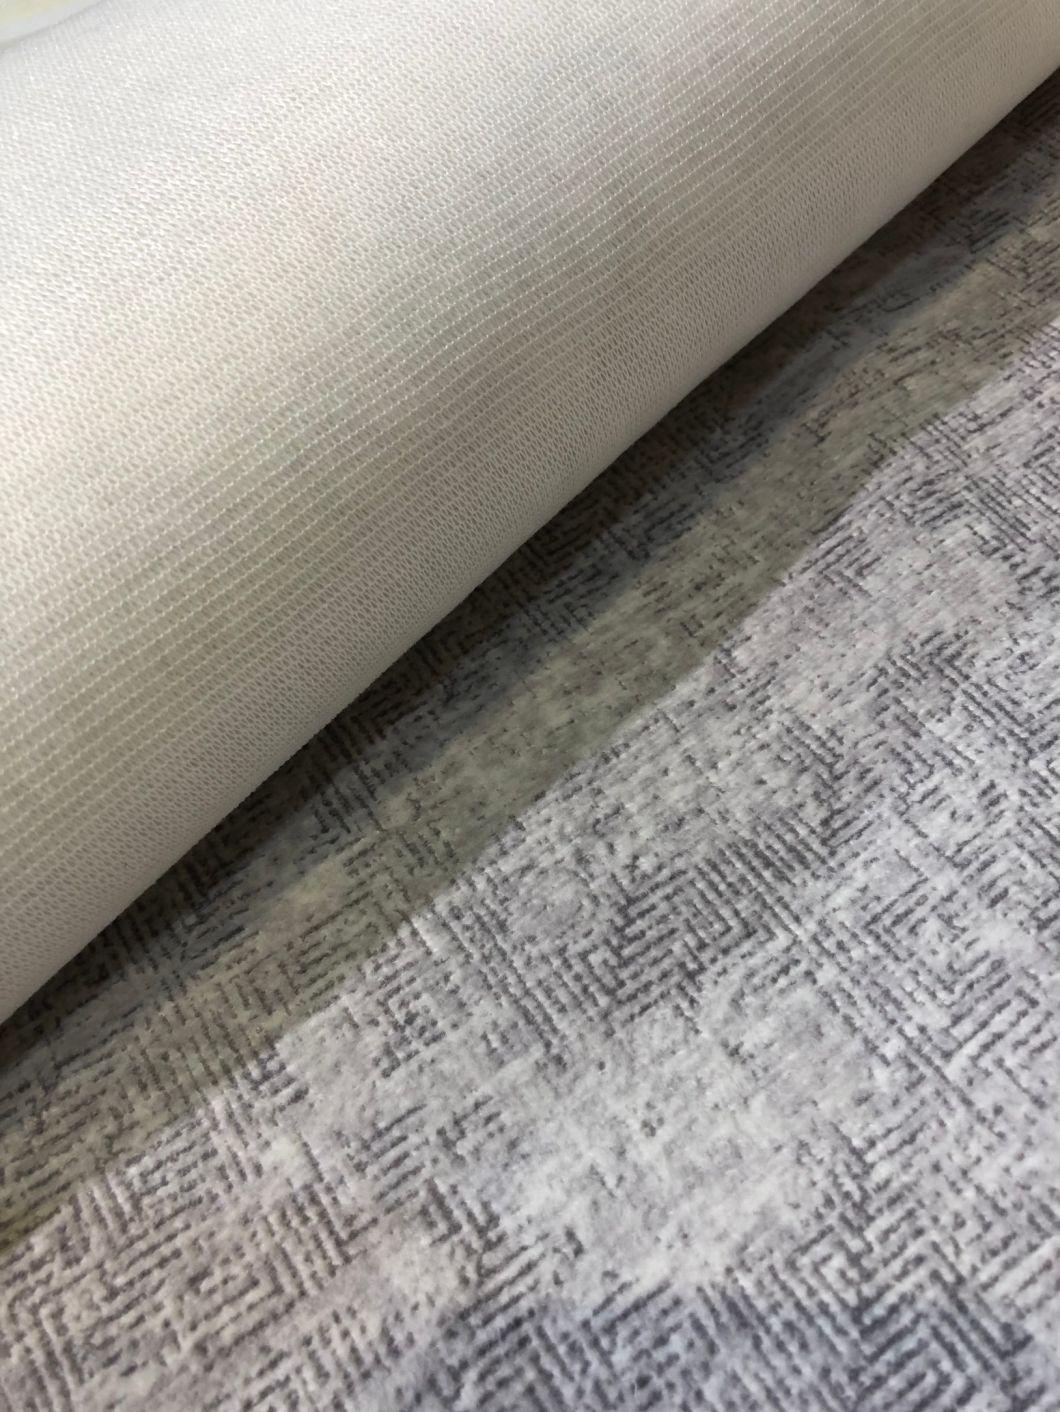 New Arrival Sofa and Furniture Upholstery Fabric Classic and Fashionable Design Knitting Velvet Jacquard Fabric (XC020)